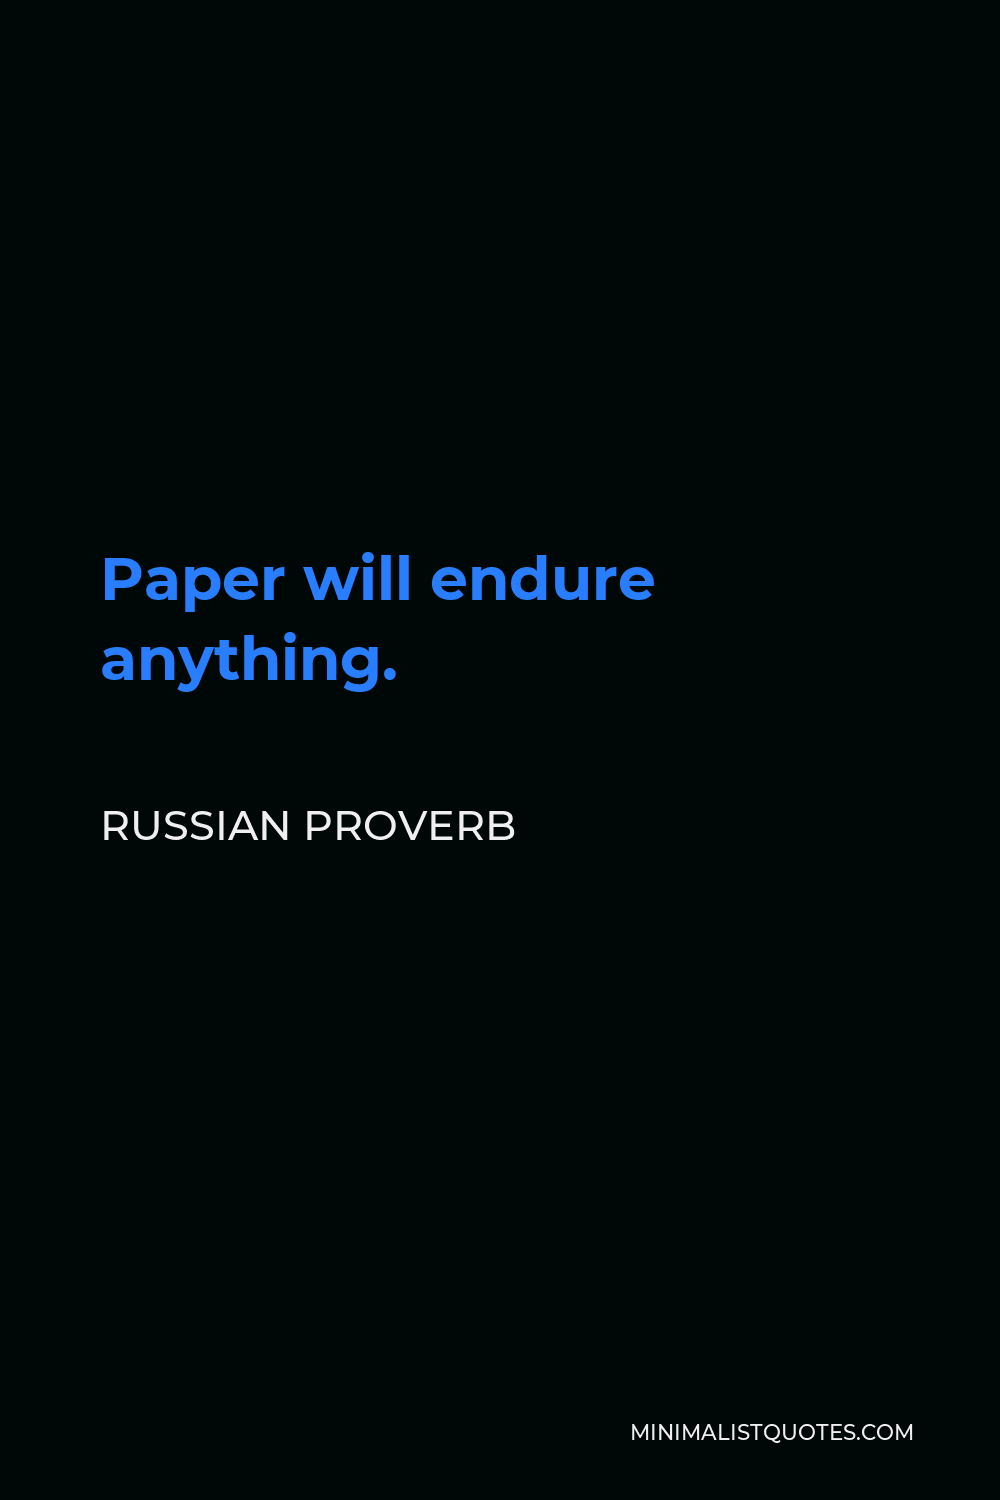 Russian Proverb Quote - Paper will endure anything.